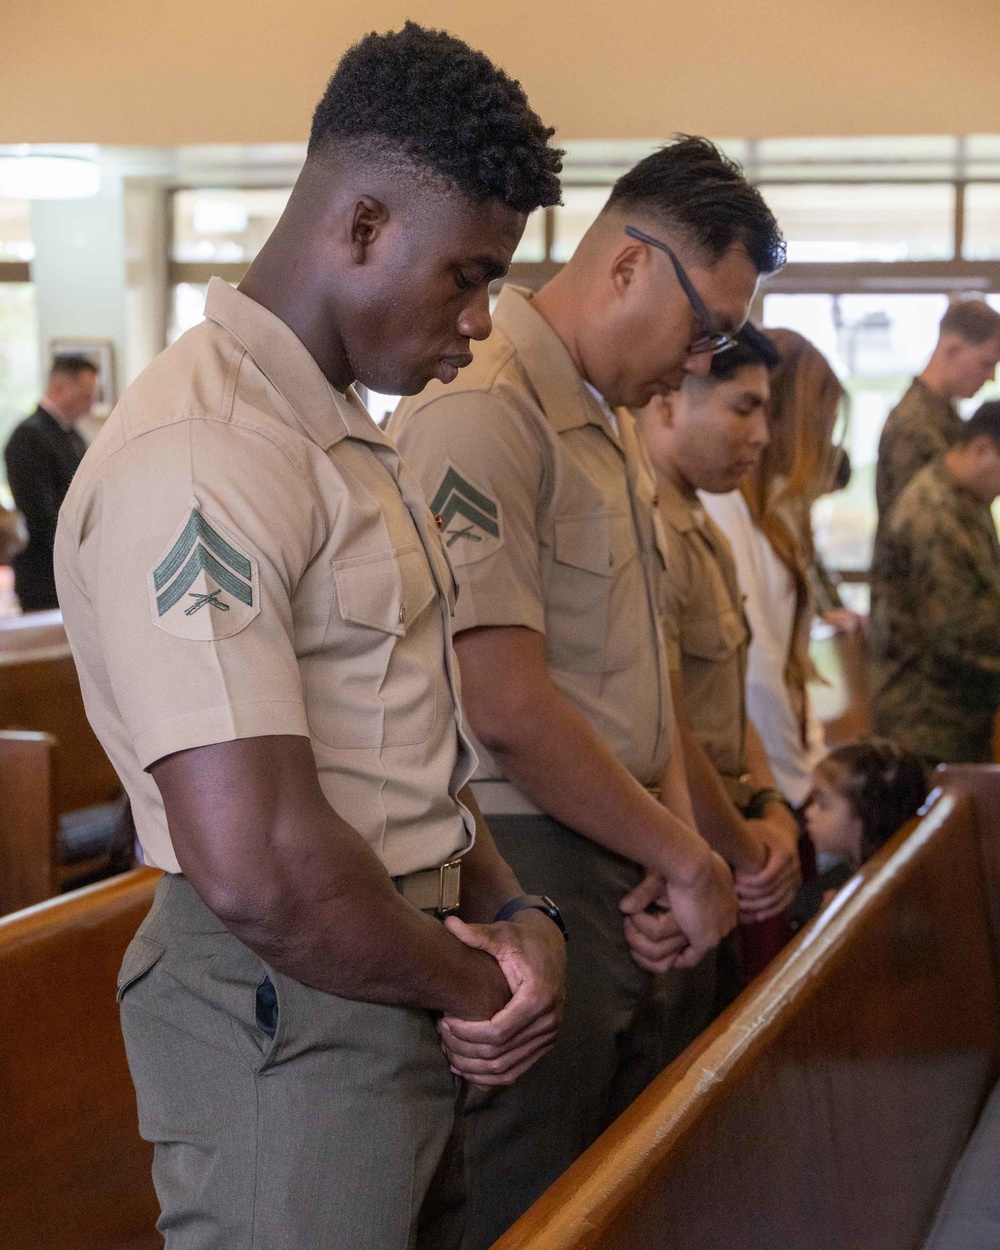 Camp Foster Chapel hosts a naturalization ceremony